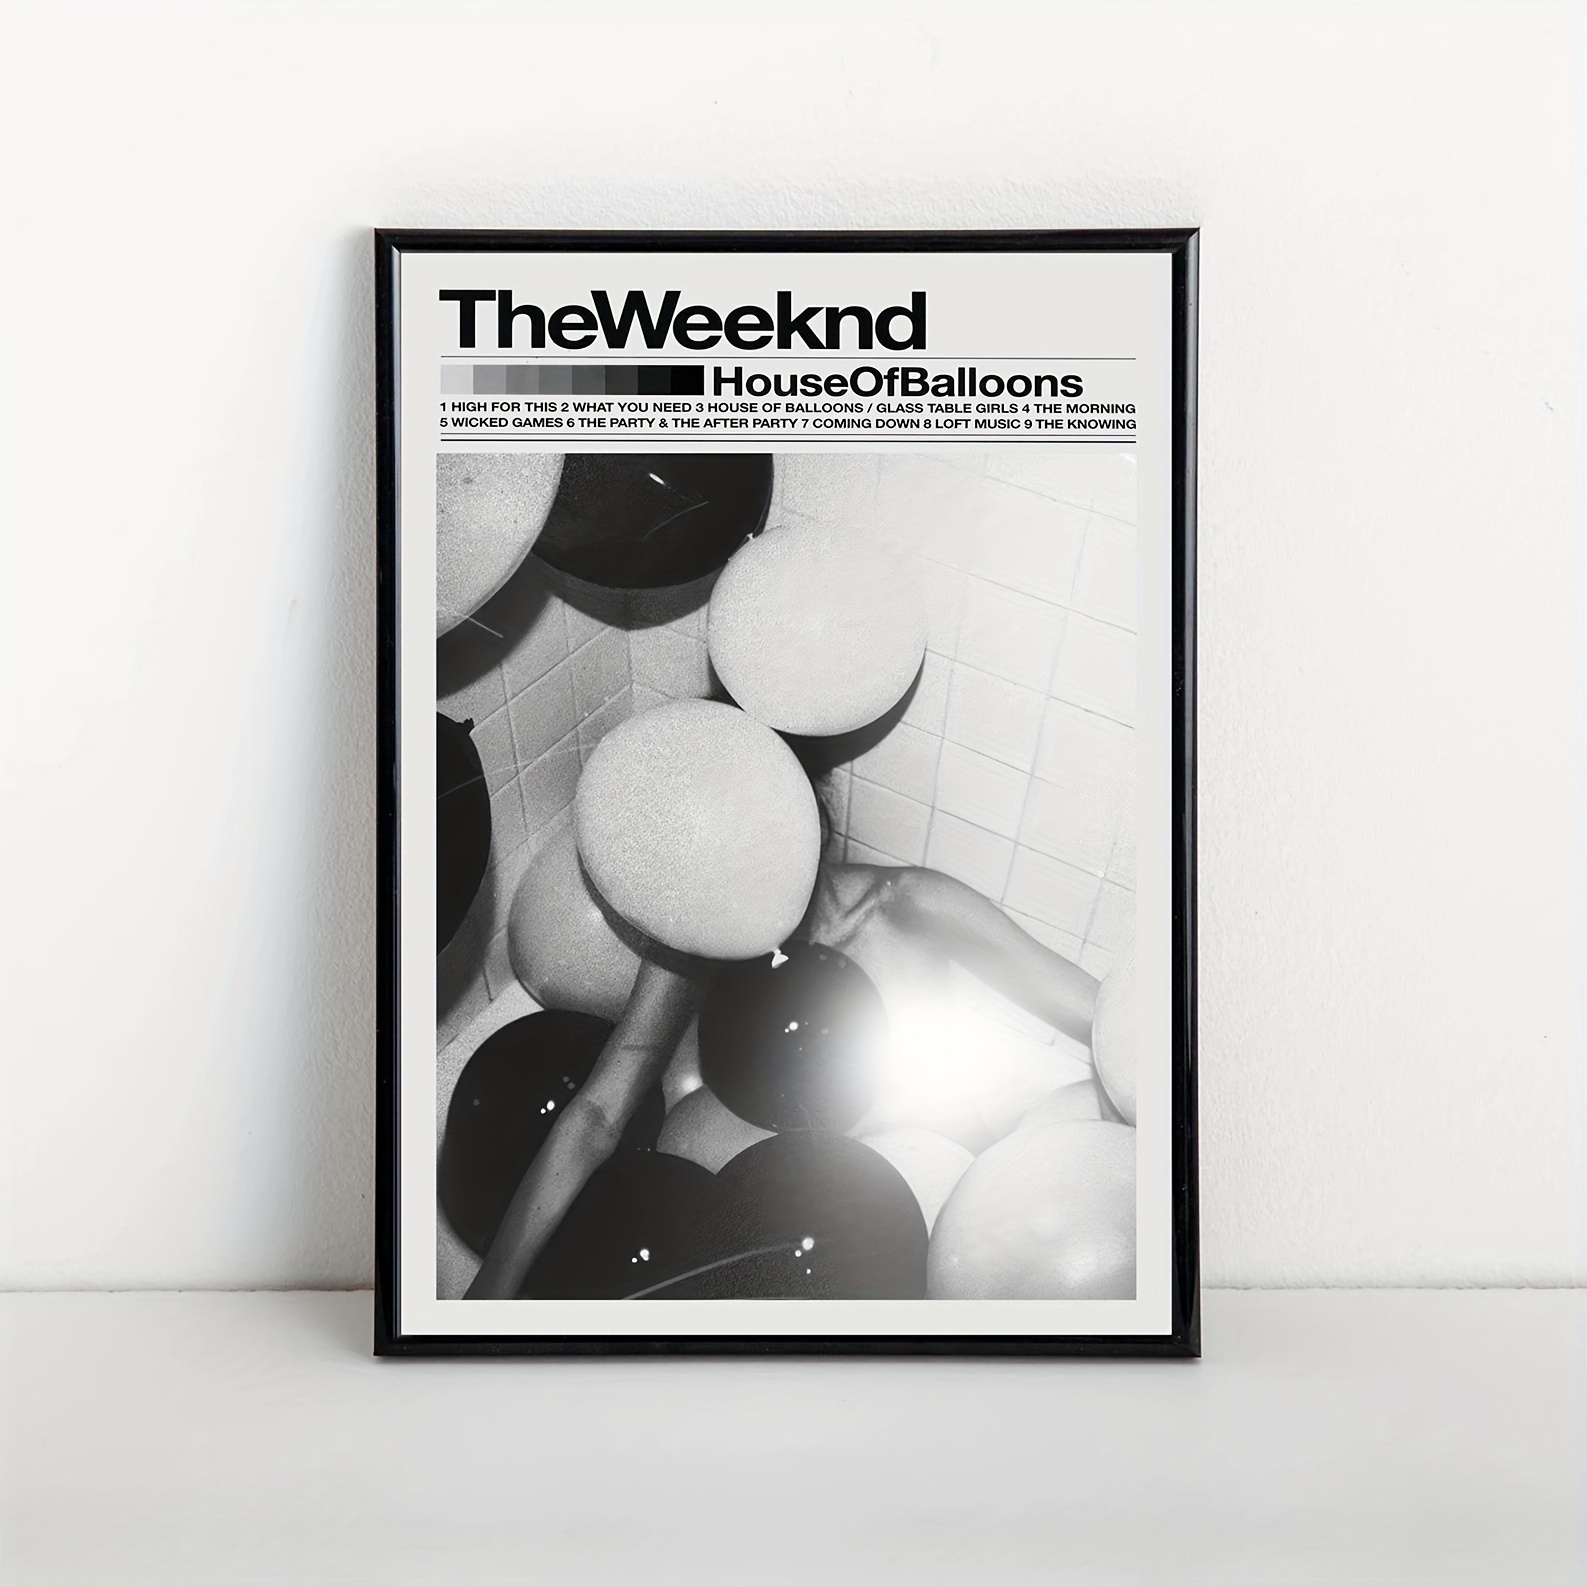 The Weeknd My Dear Melancholy Album Cover Poster / Music Print